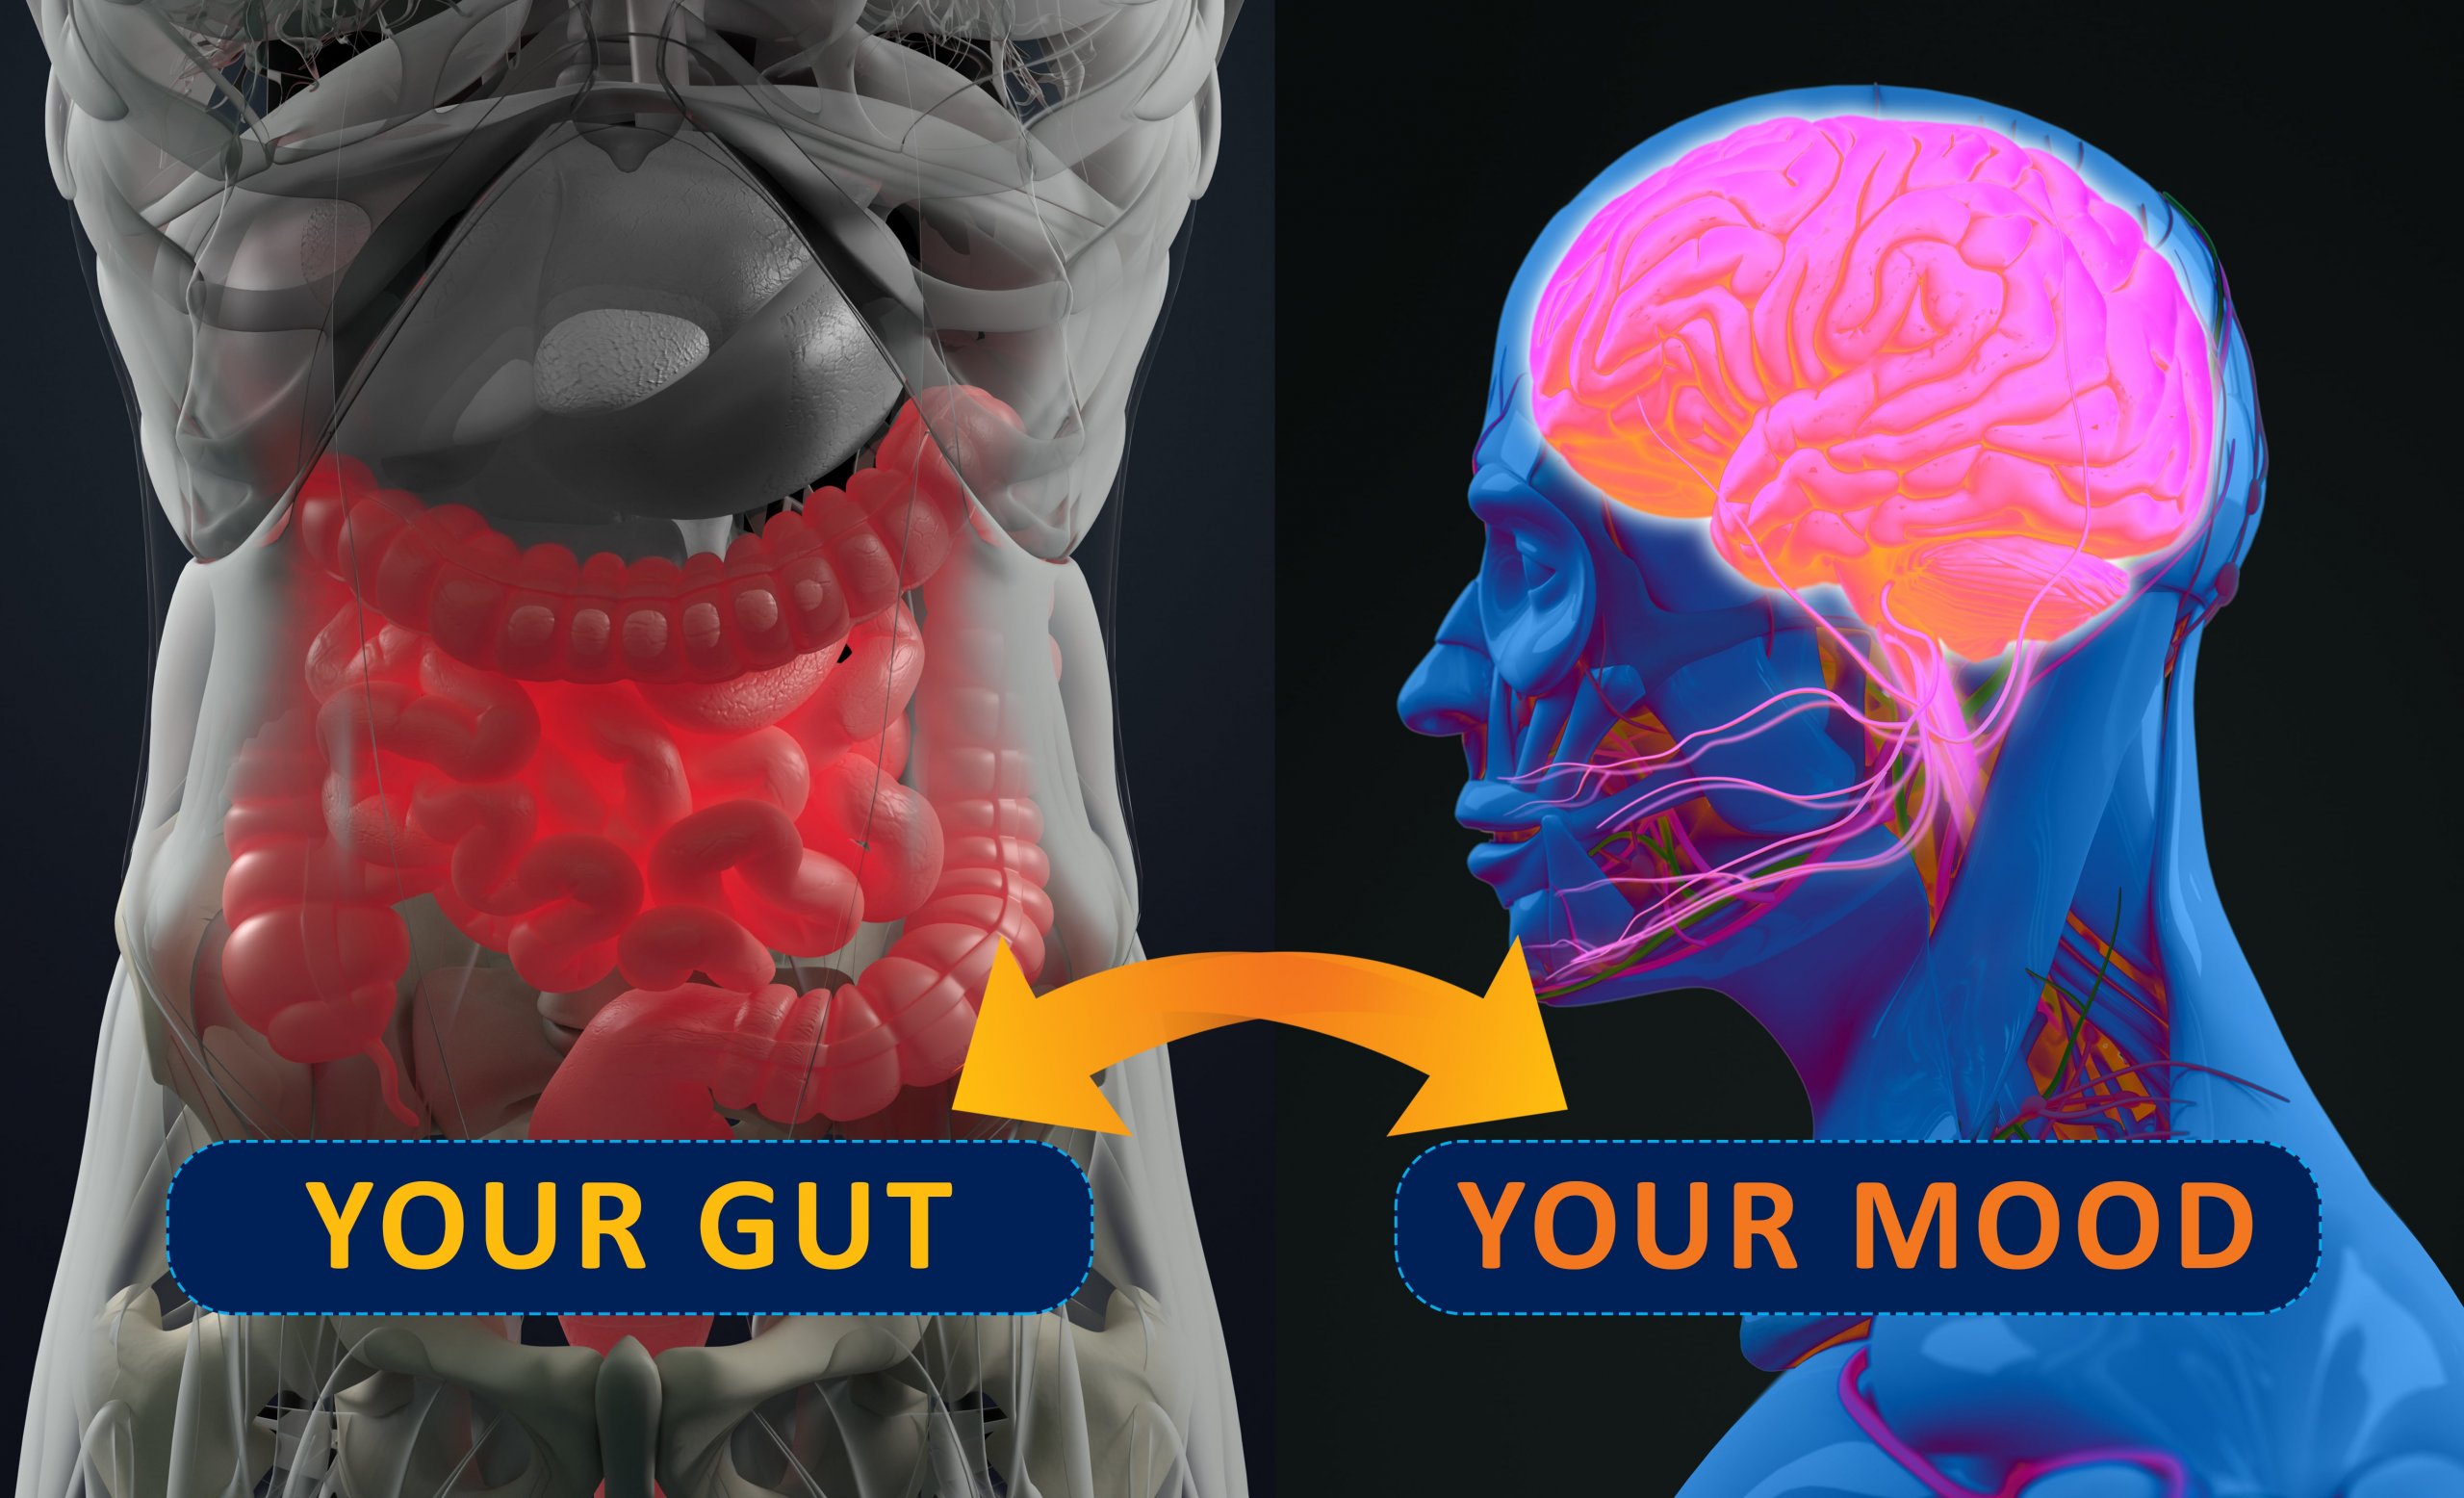 The link between your gut and your mood is closer than you think